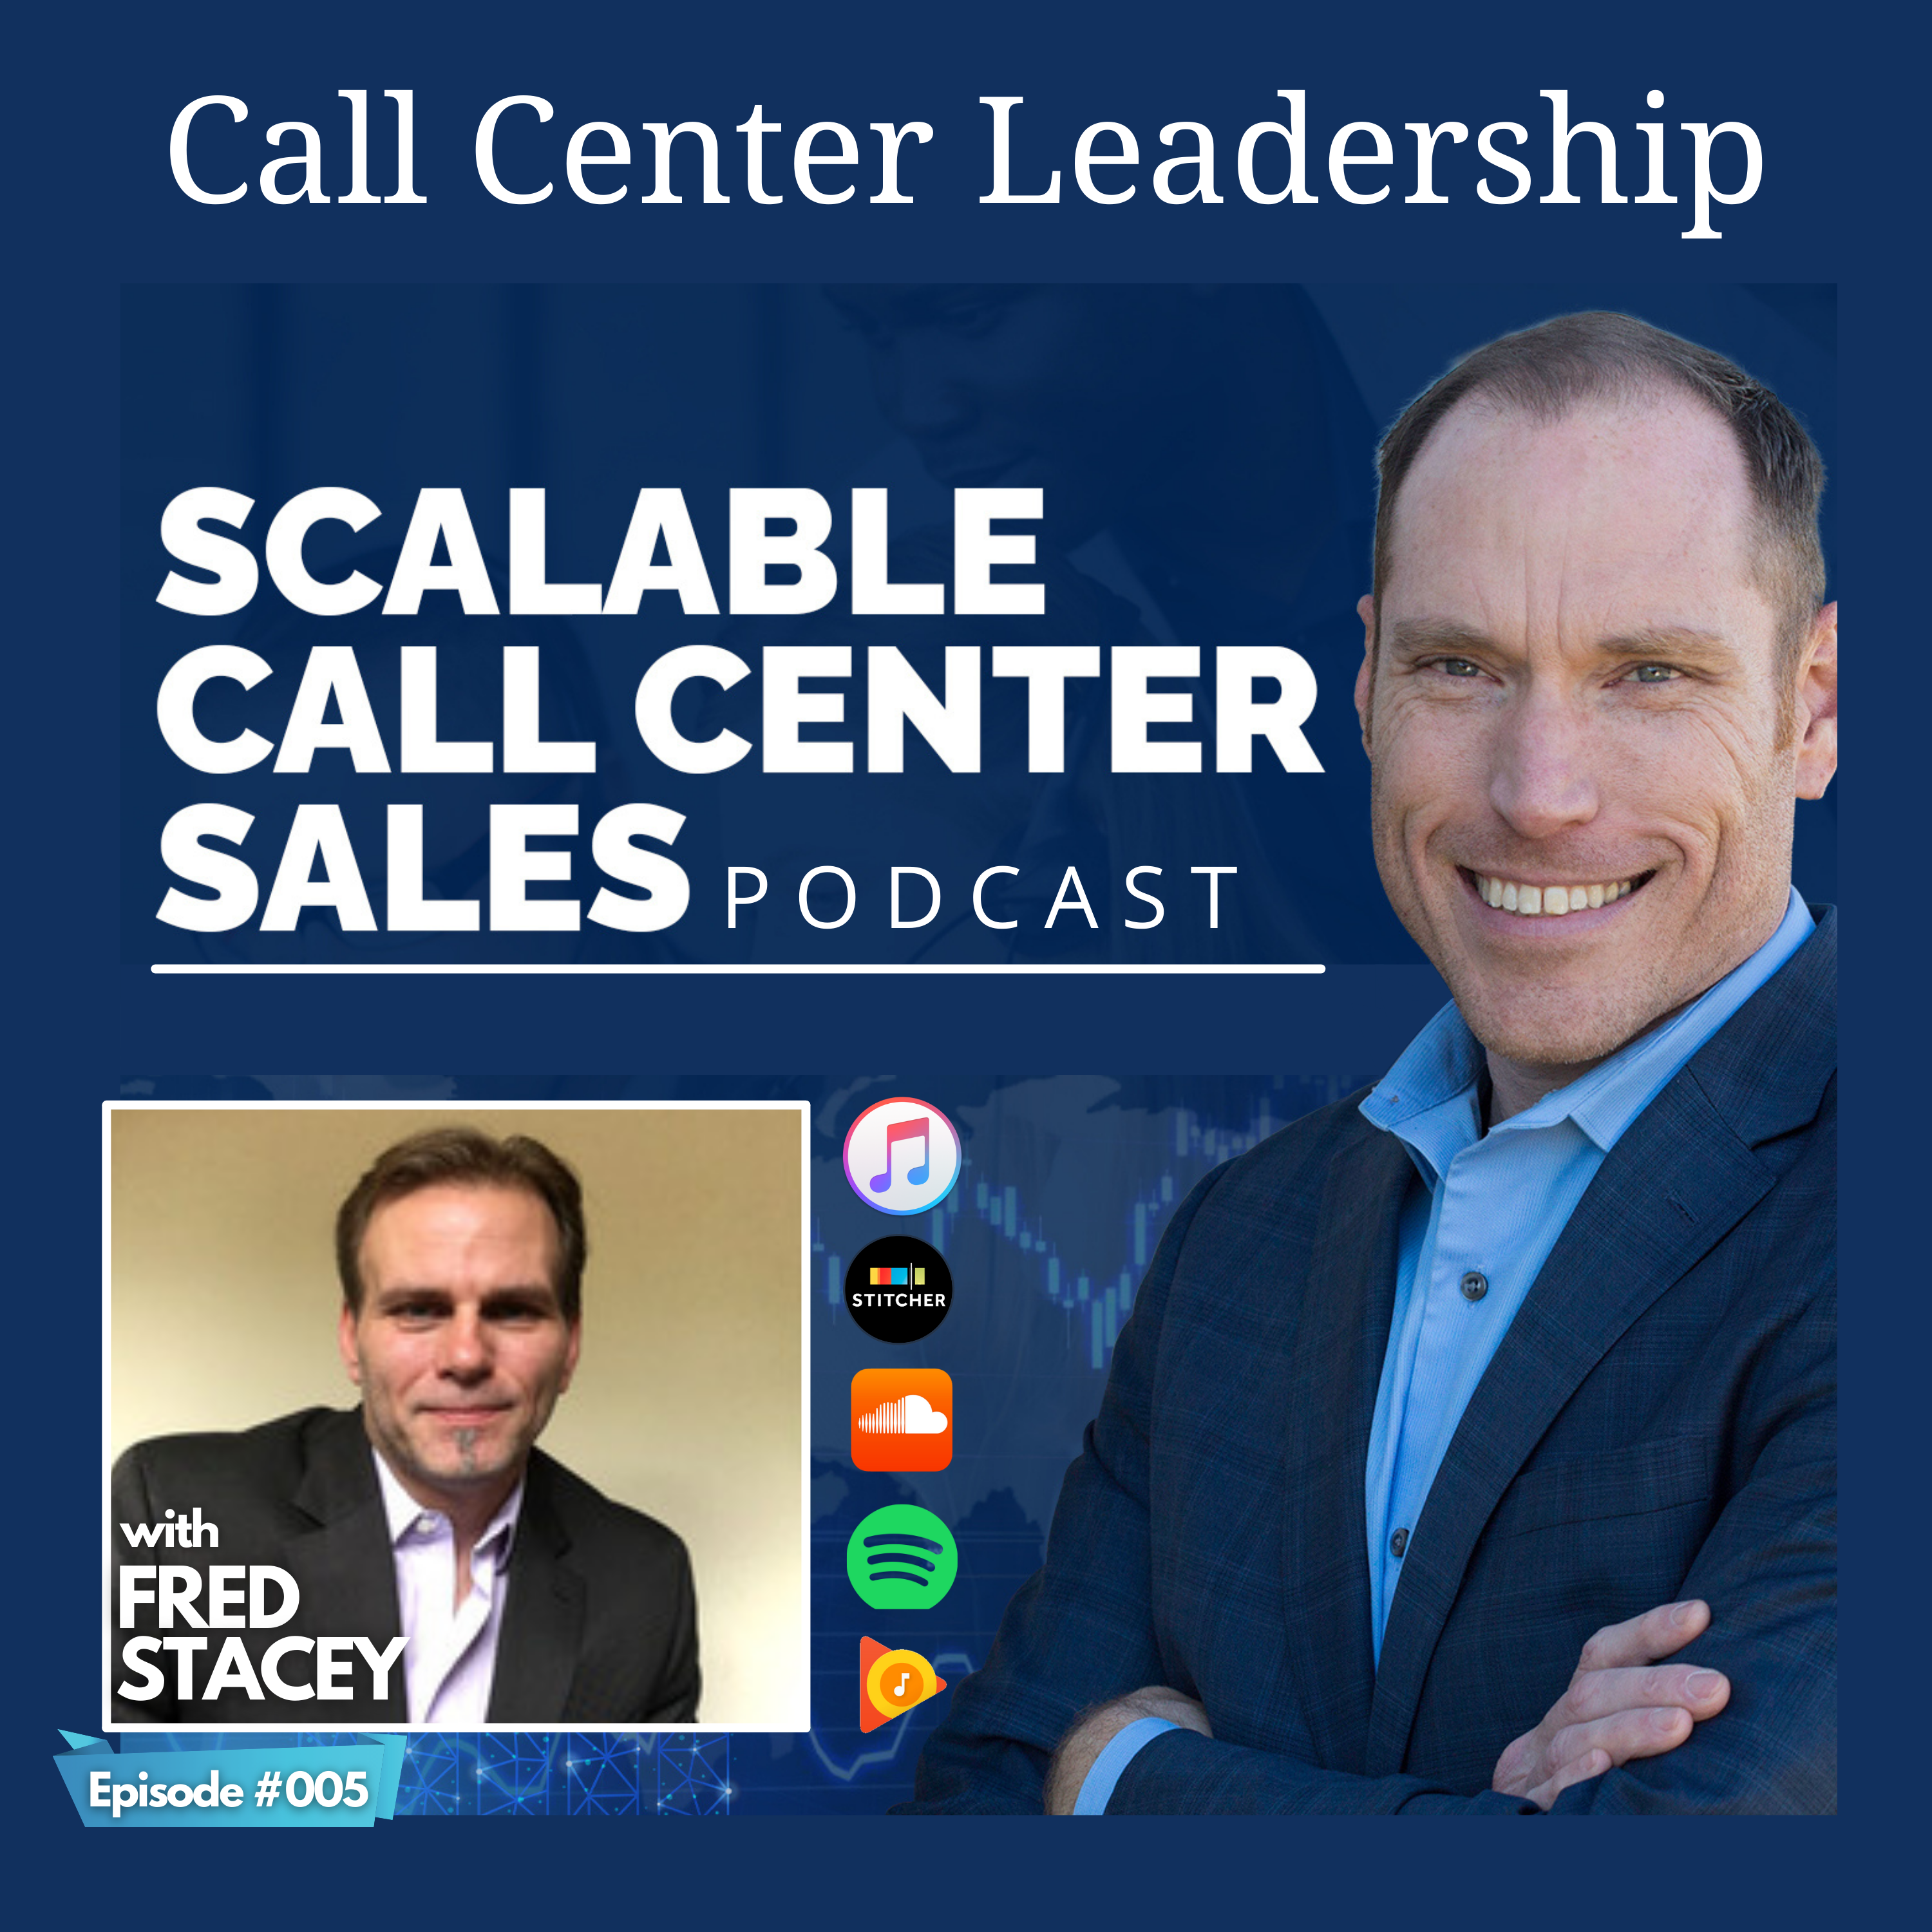 [005] Call Center Leadership, with Fred Stacey